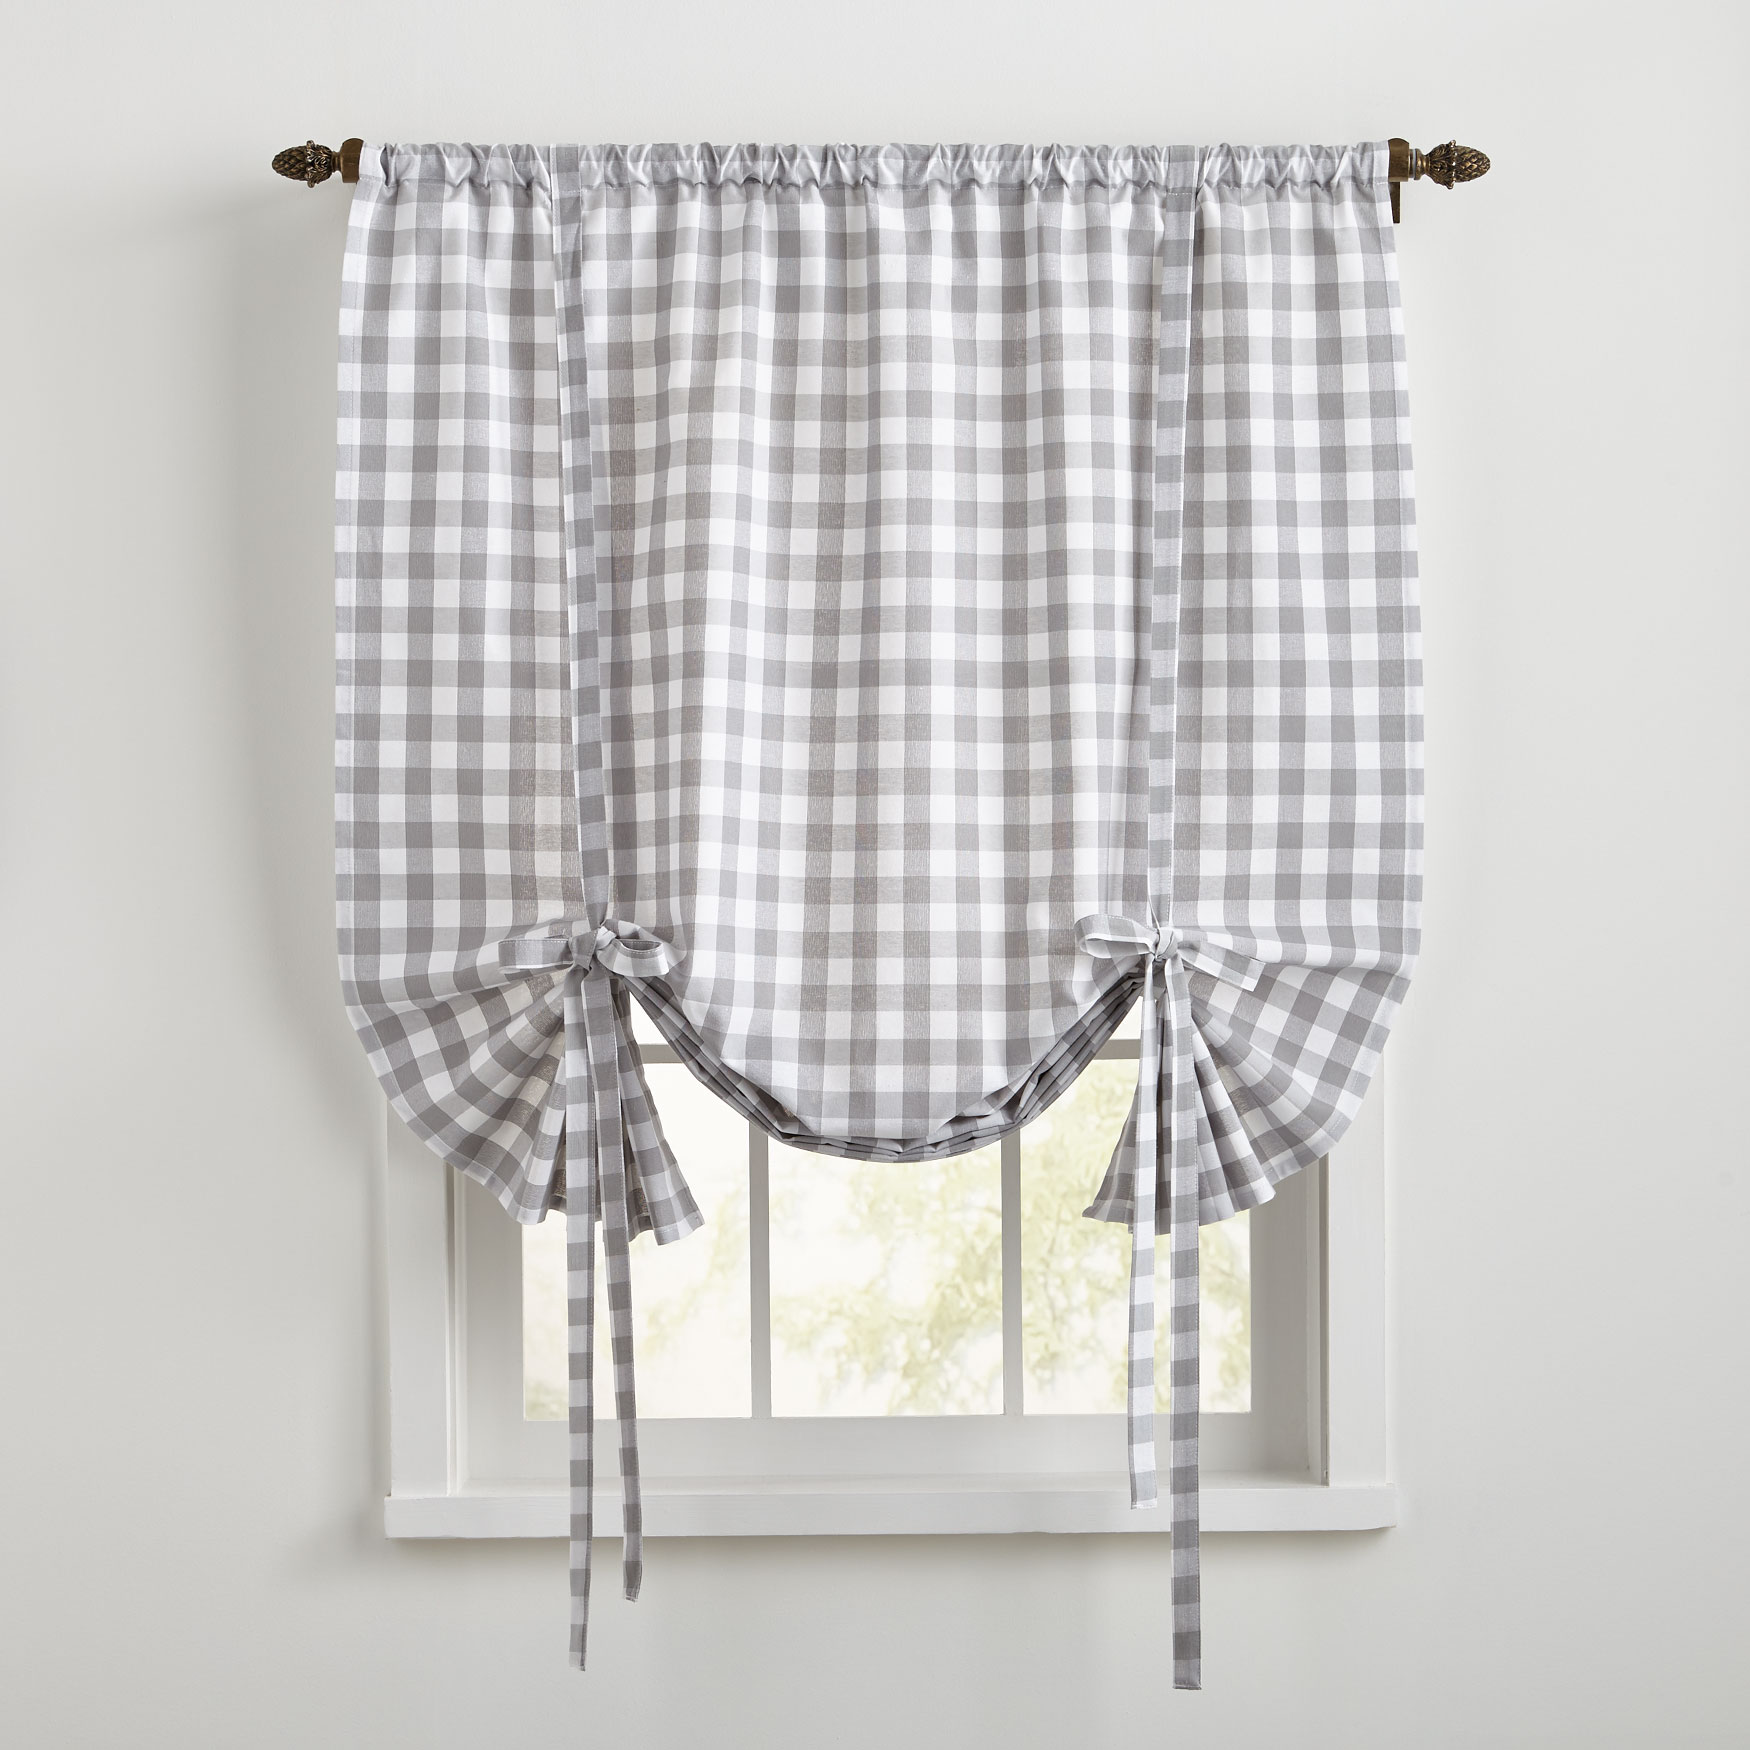 Buffalo Check Plaid Gingham Pattern Rod Poc Caromio Tie Up Curtains For Windows 